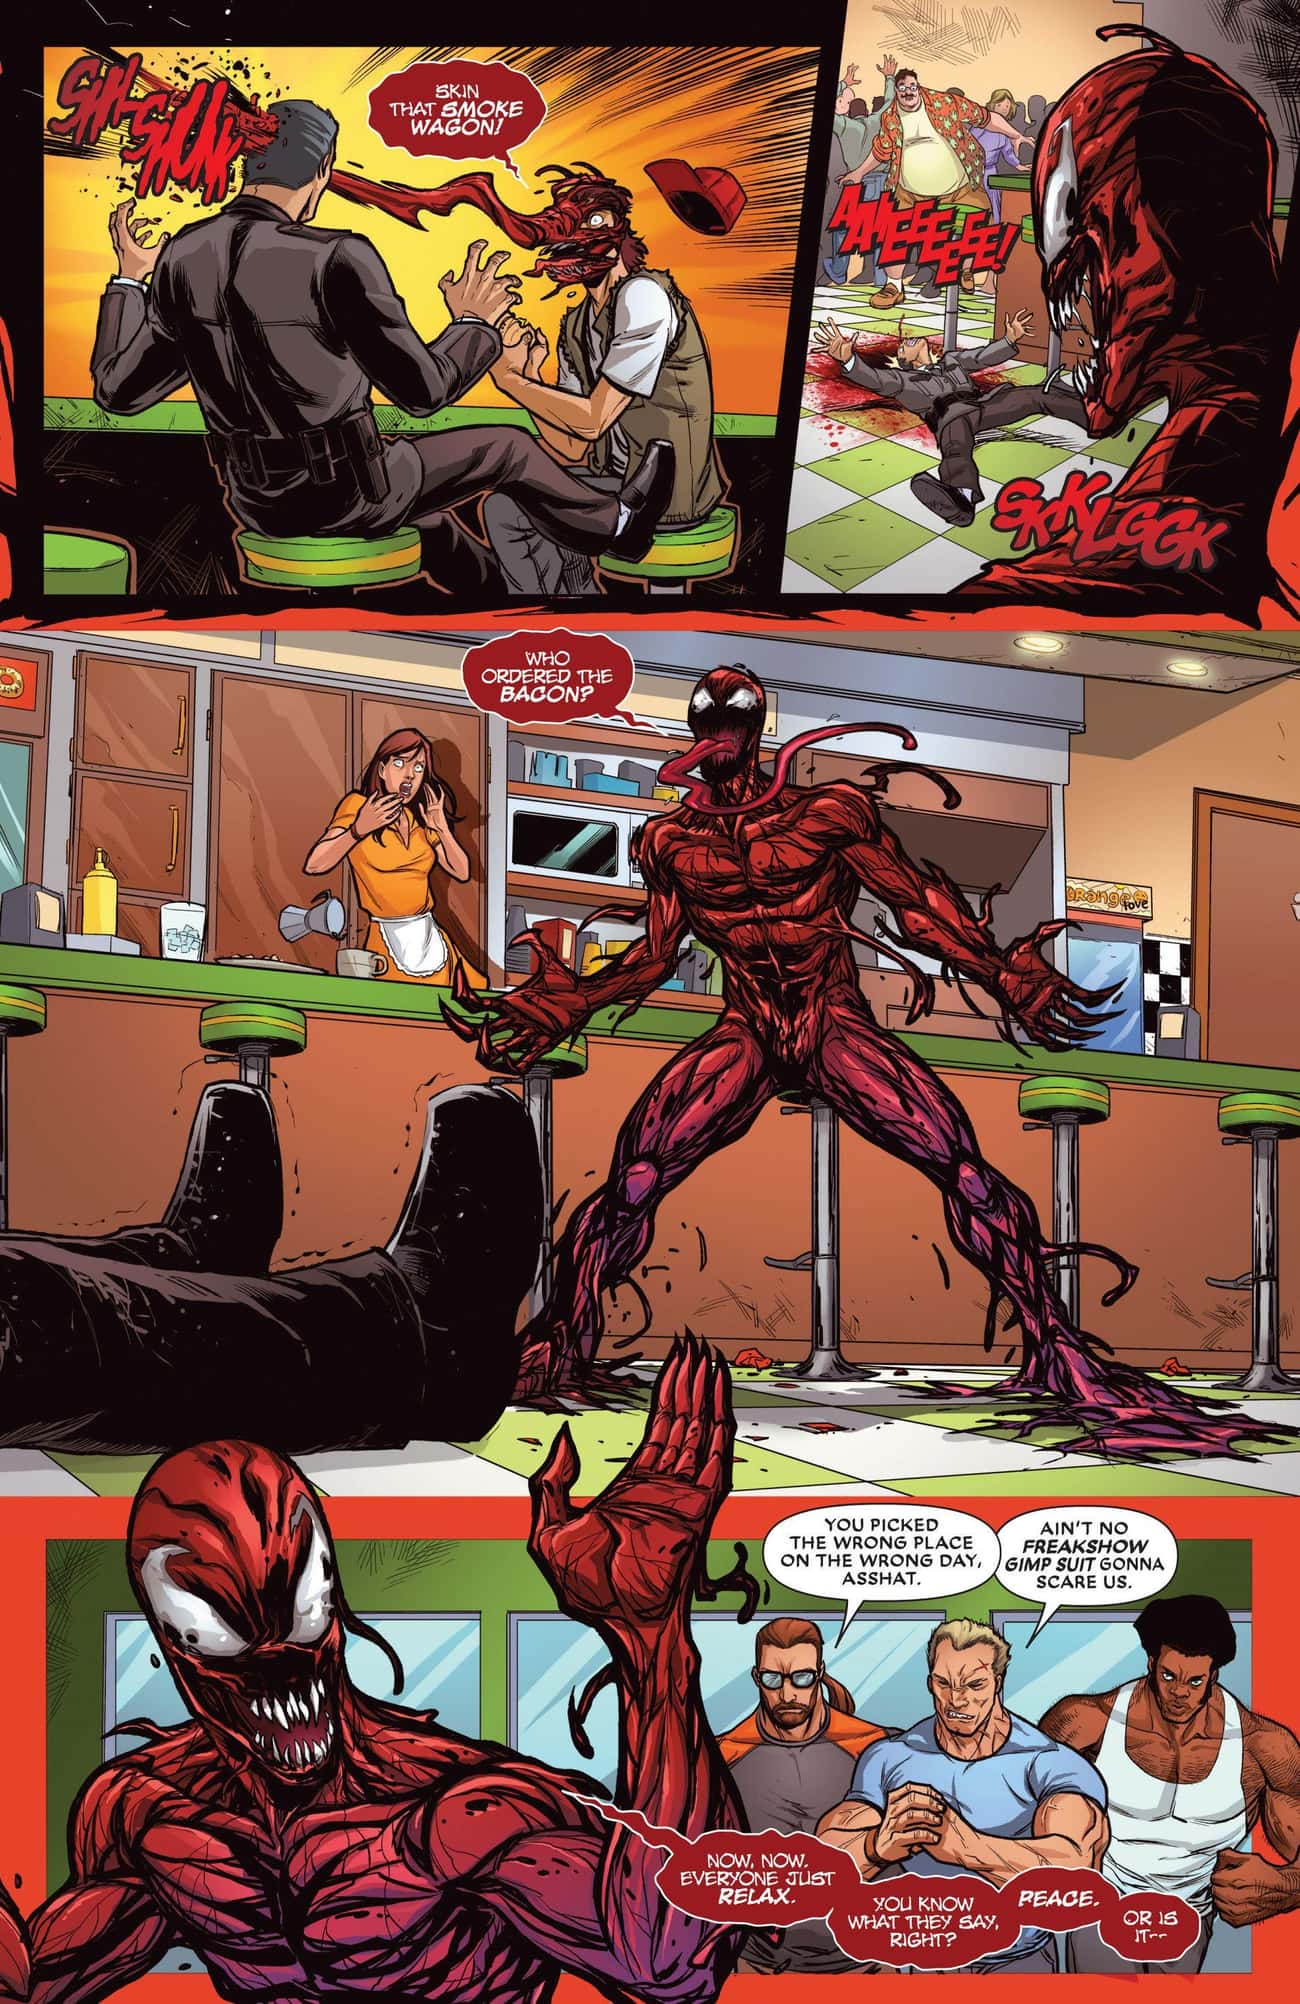 Carnage Slaughters A Diner Full Of People